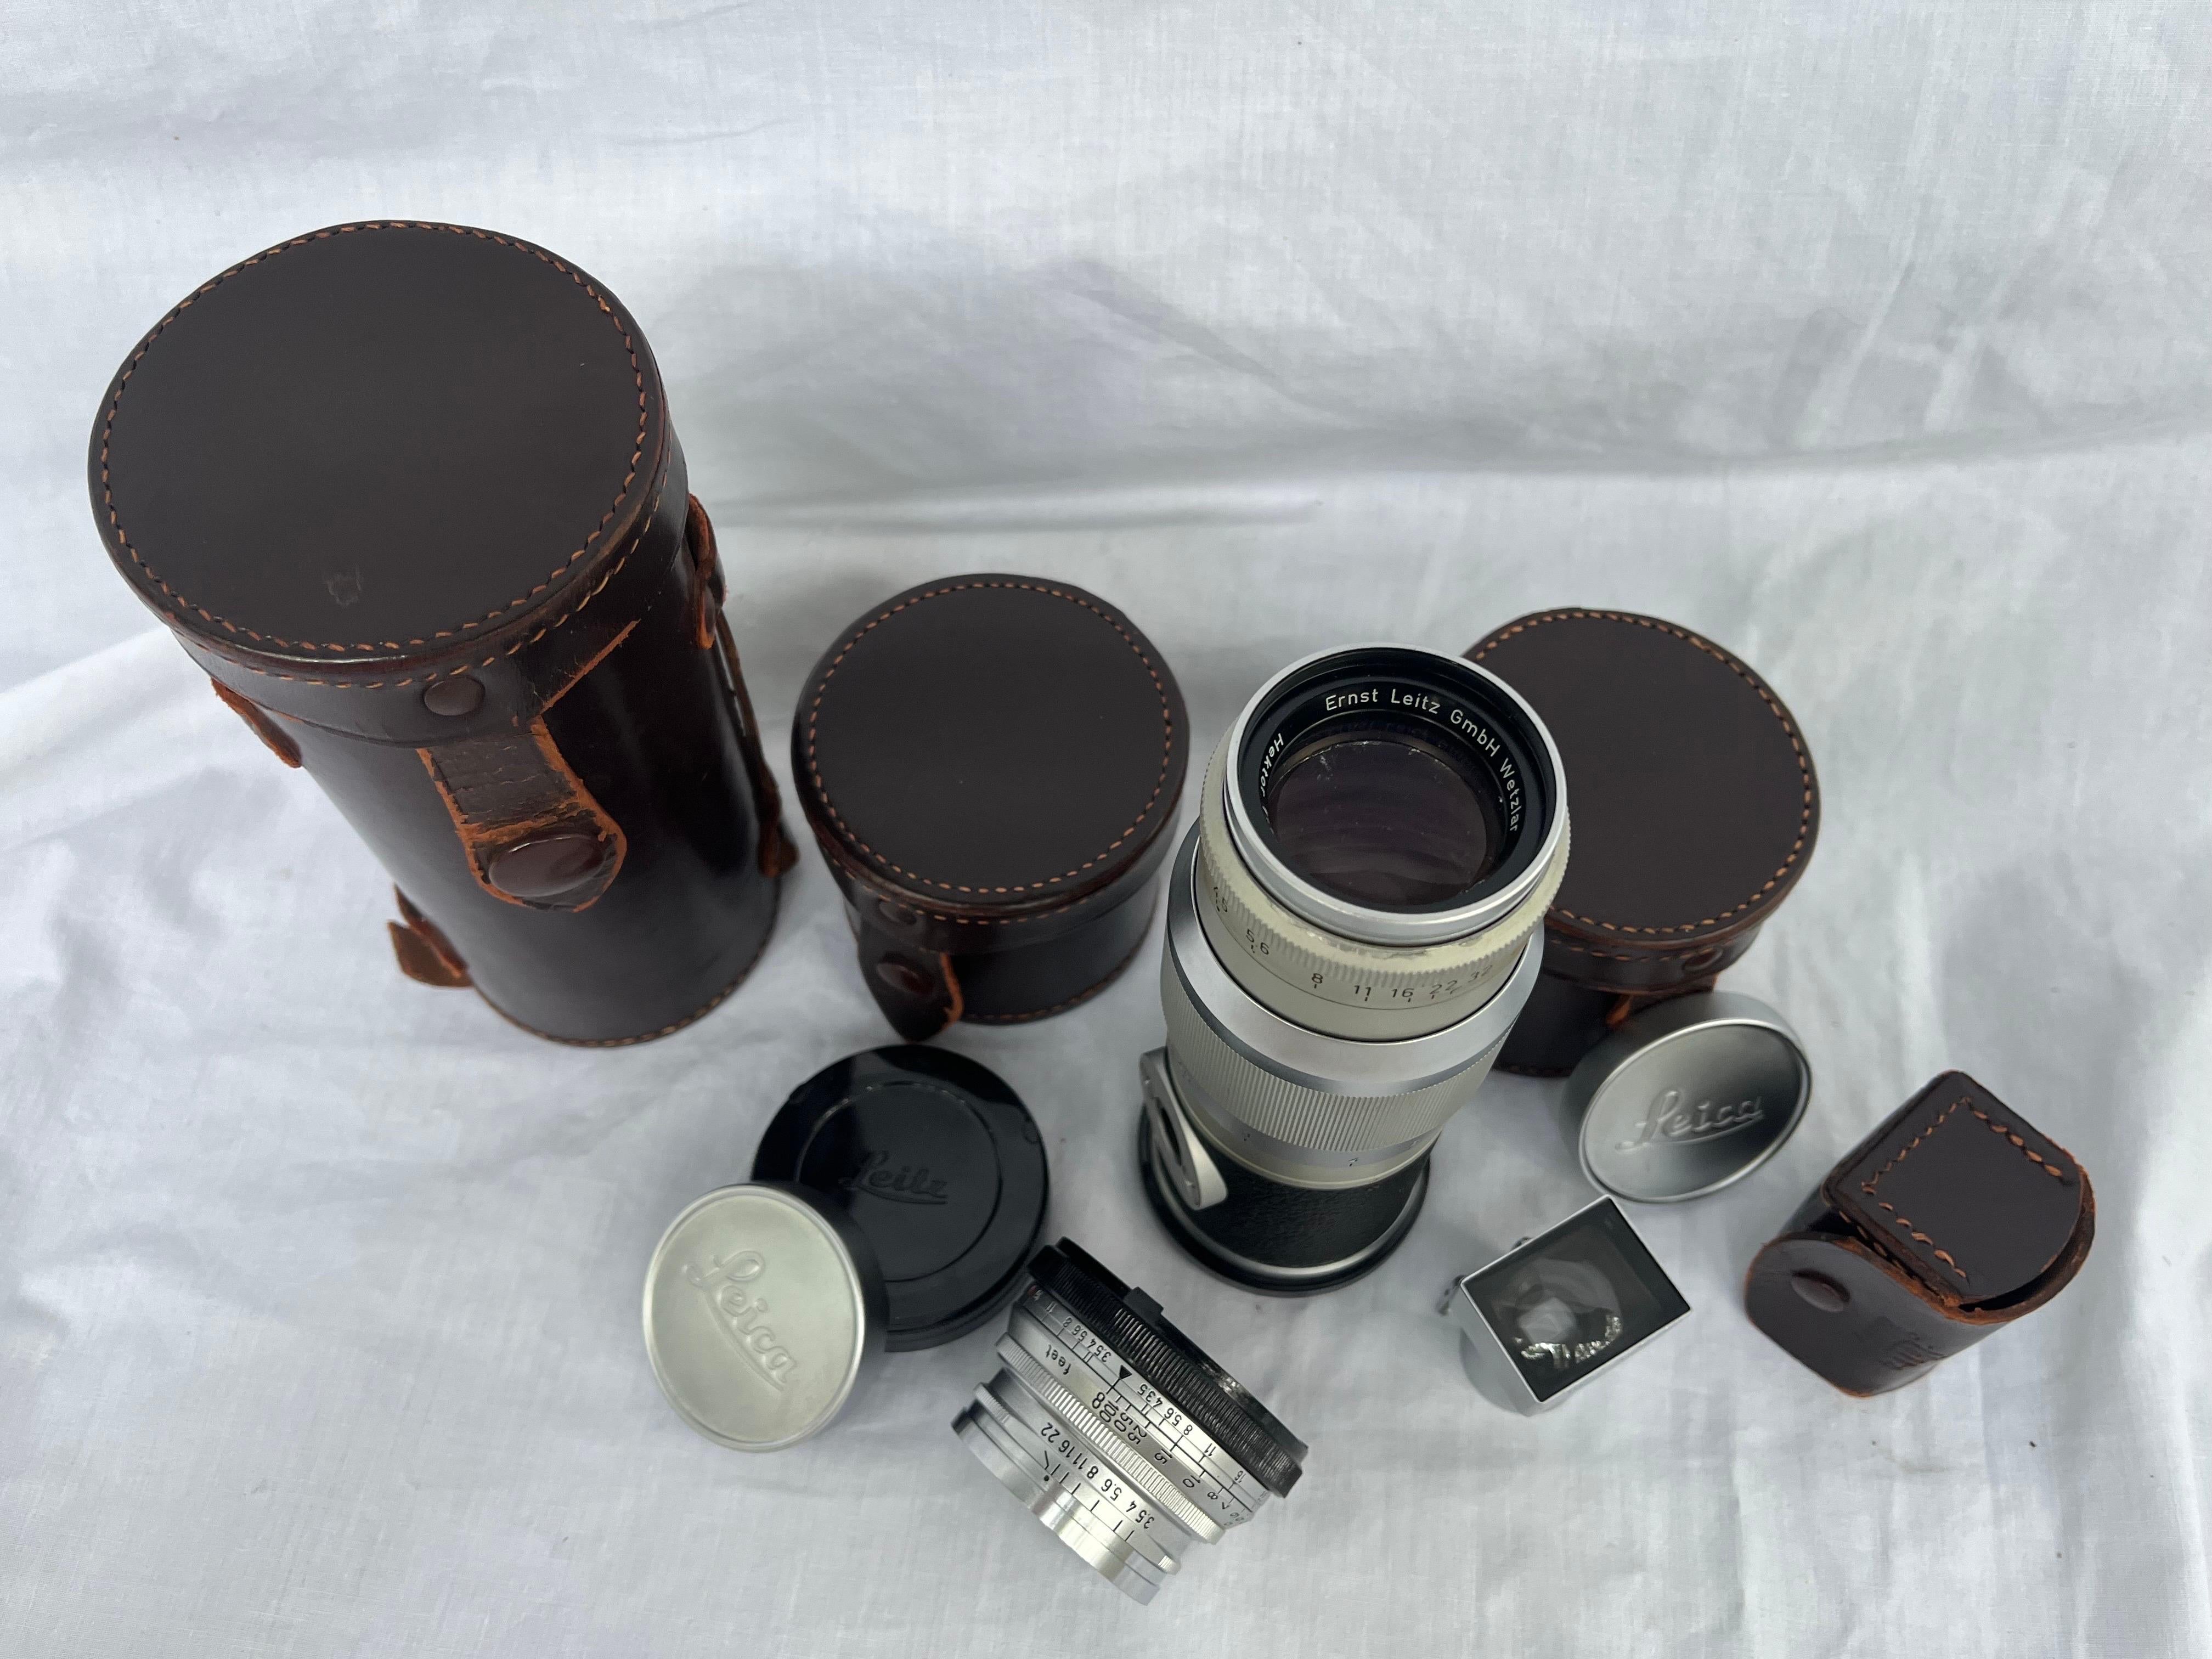 A collection of mid 20th century Leica / Ernst Leitz lenses. There is a Summaron, a Hektor and a Range Finder. Also, cases and lens caps. All of these have been previously used. What makes Leica so good you may be asking. Well here's a quote that's